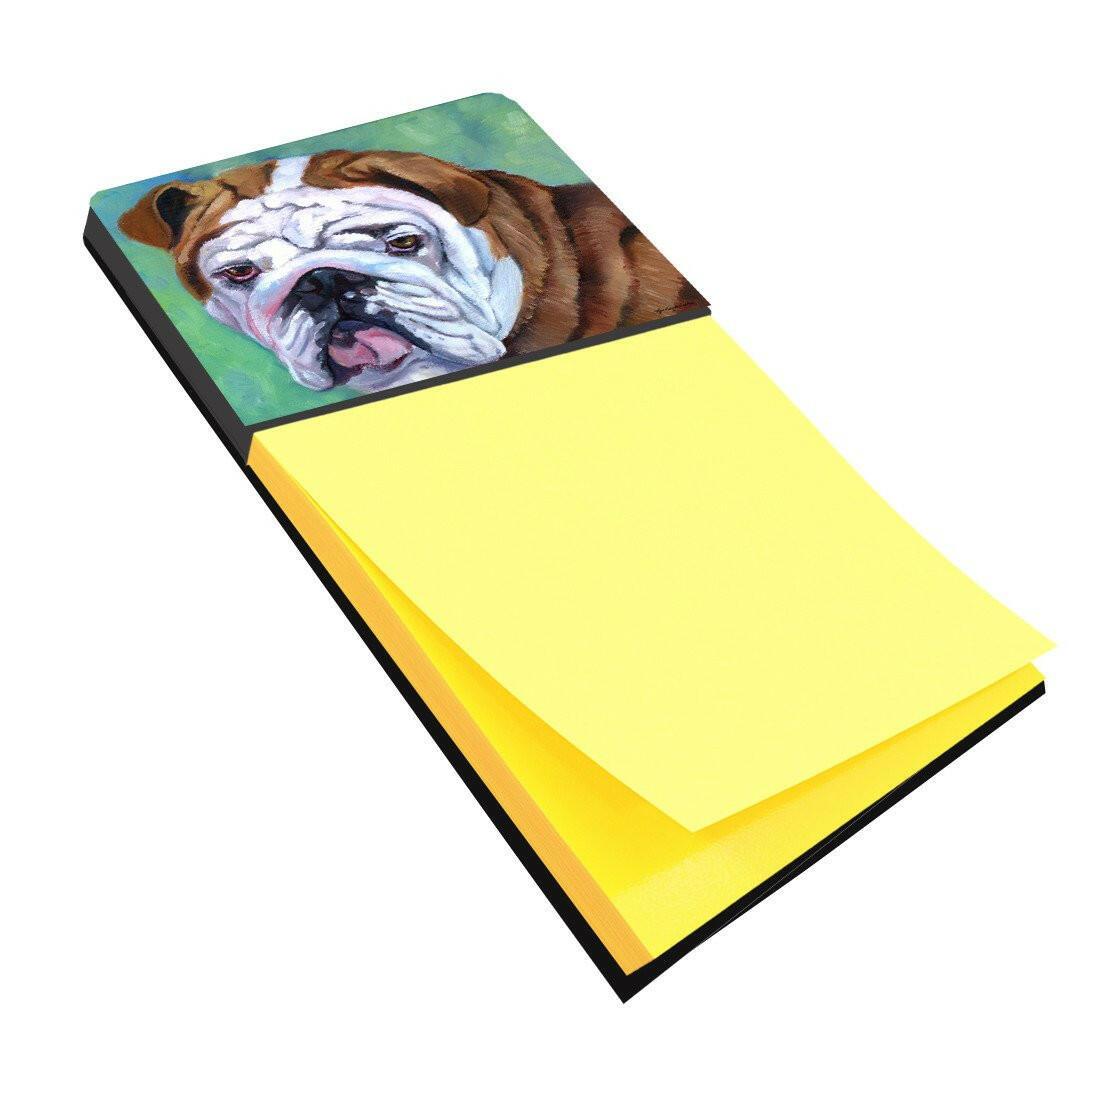 Admiral the English Bulldog Sticky Note Holder 7349SN by Caroline's Treasures